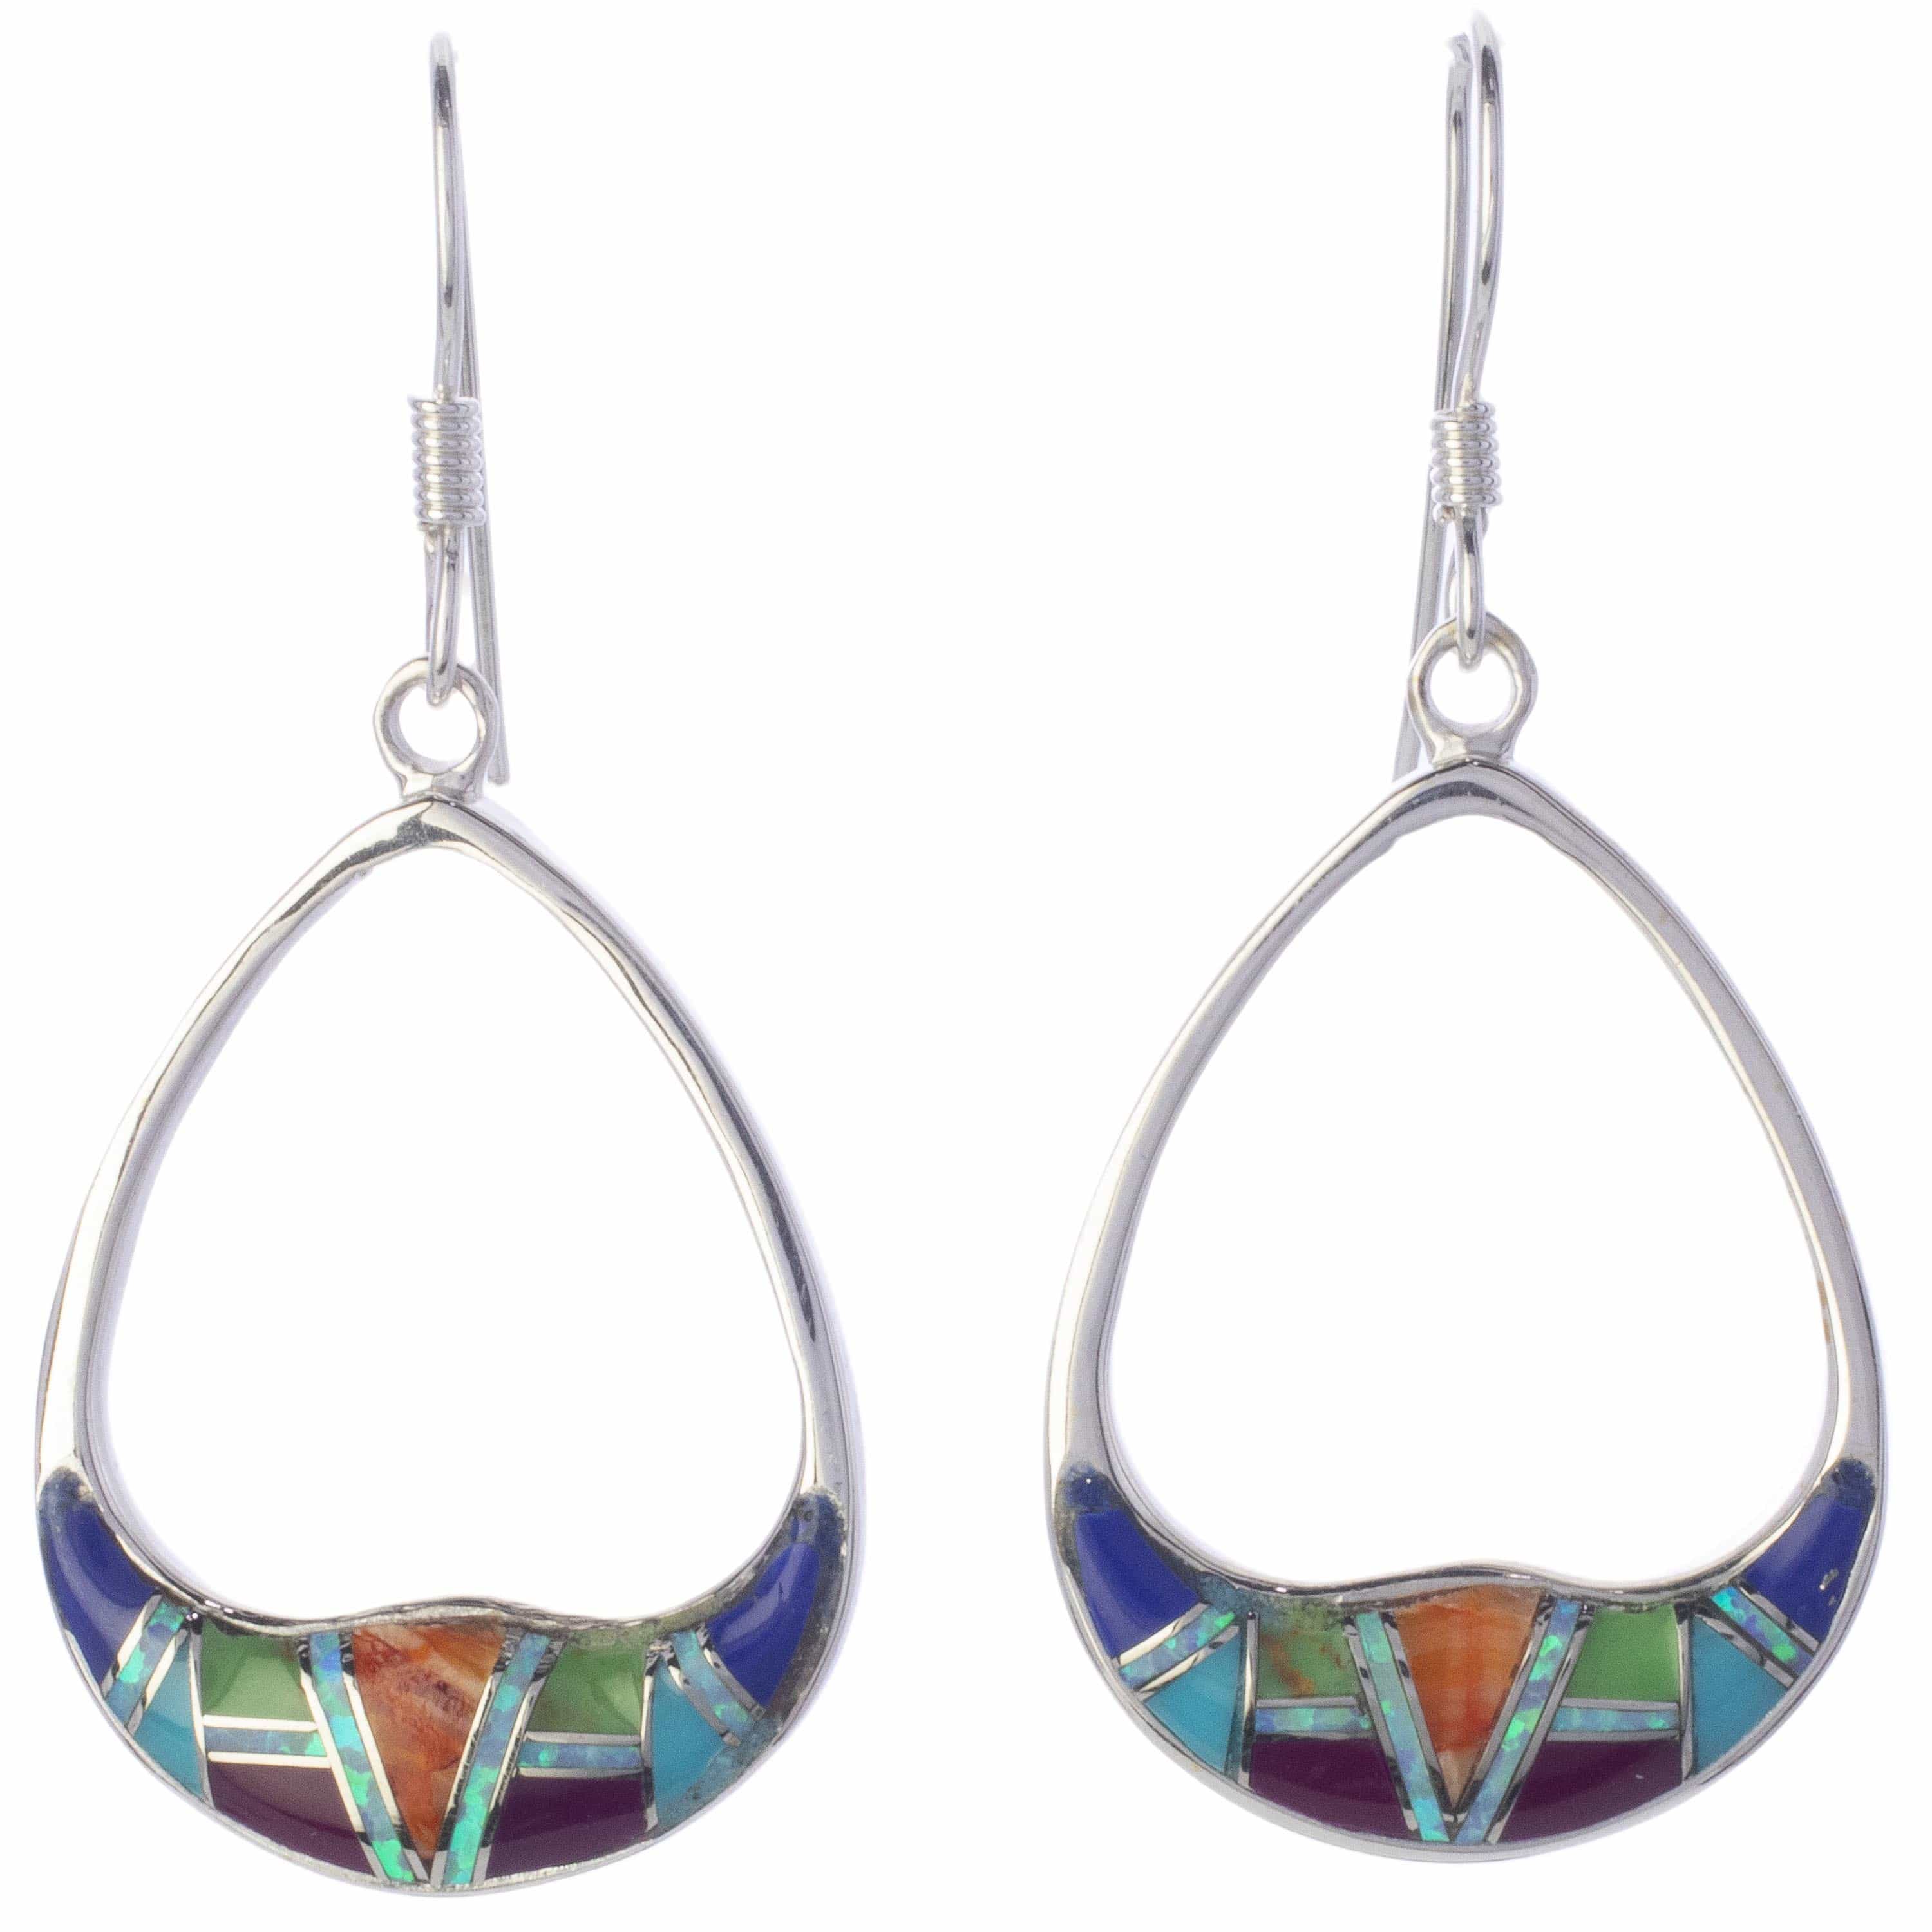 KALIFANO Southwest Silver Jewelry Multi Gemstone Sterling Silver Dangle Earrings with French Hook USA Handmade with Opal Accent NME.2316.MT